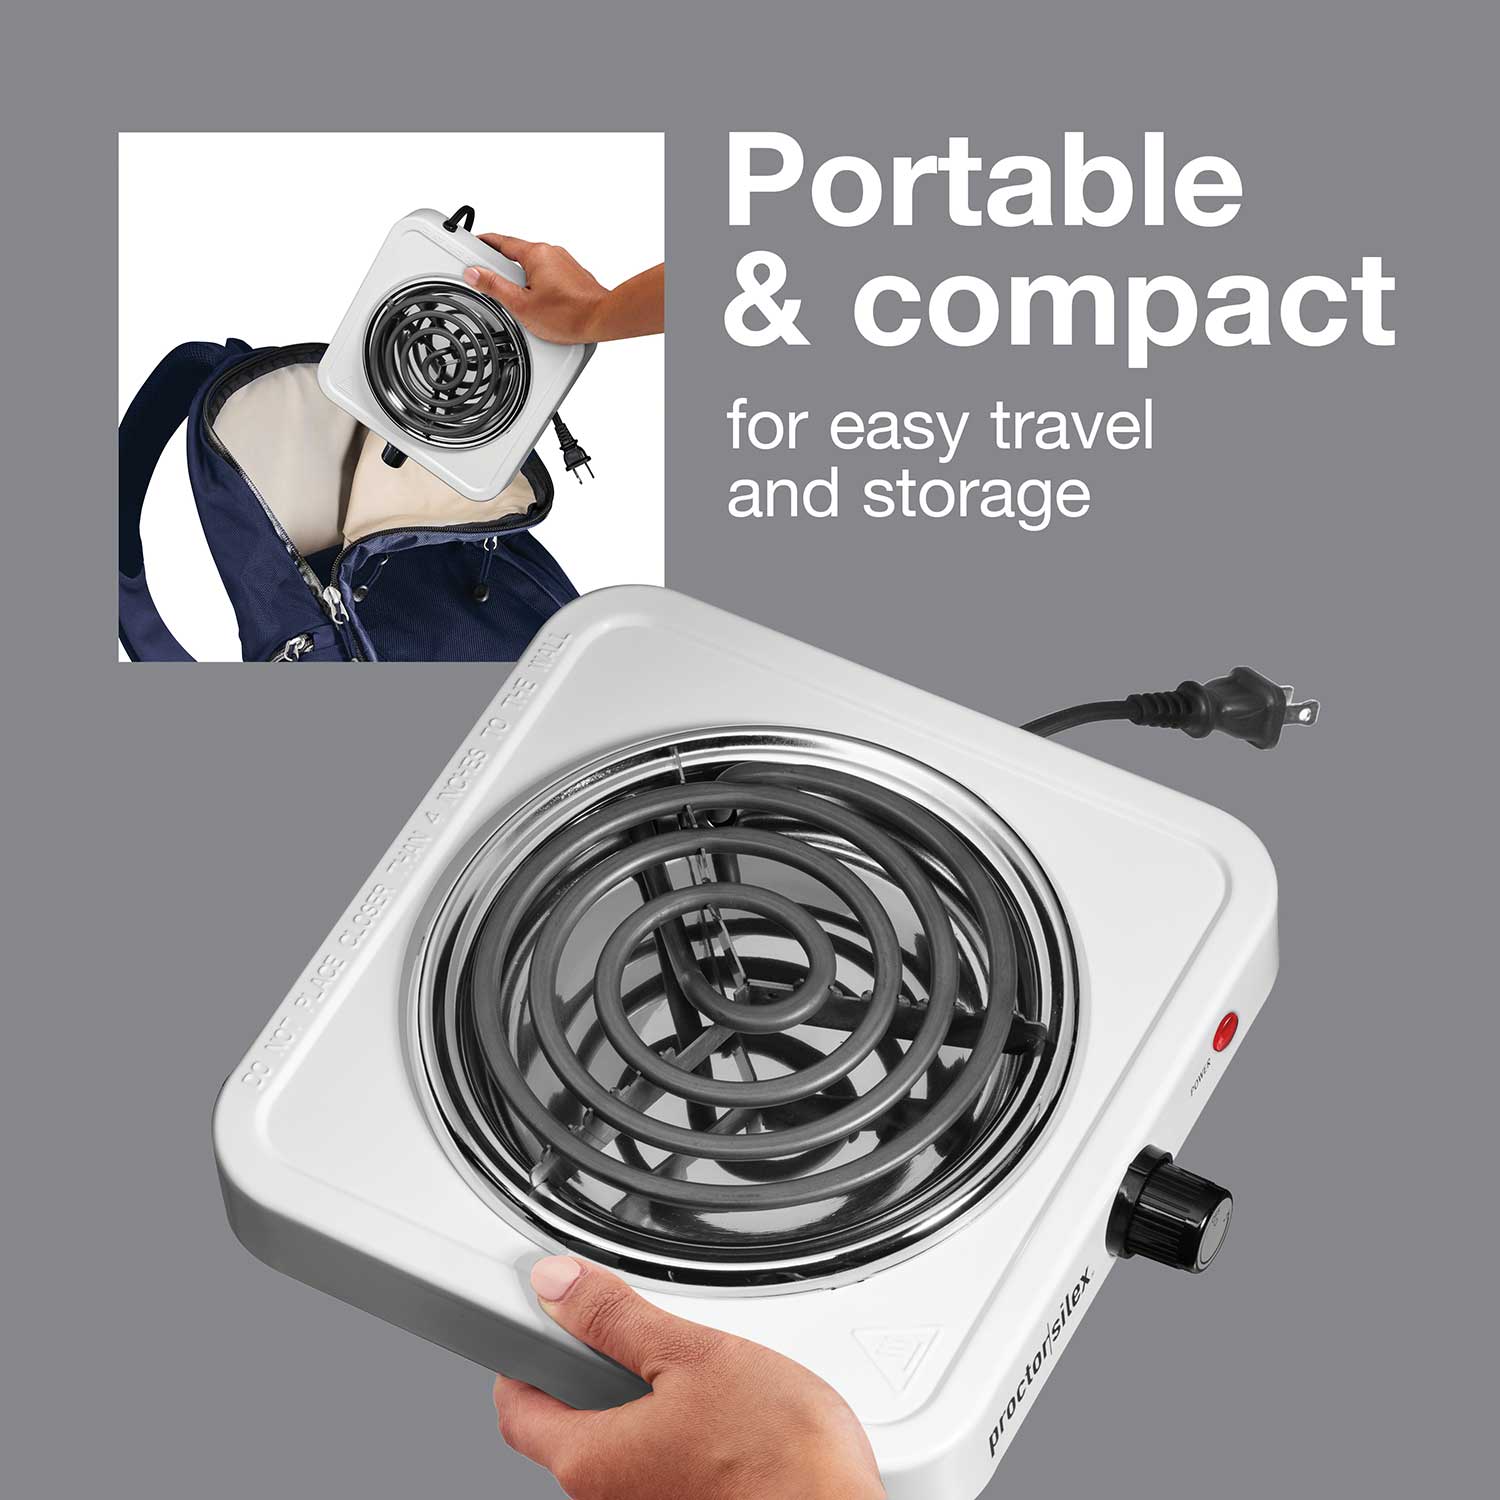 Portable Small Electric Stove Burner Hot Plate for Home Coffee Tea Water  Heater